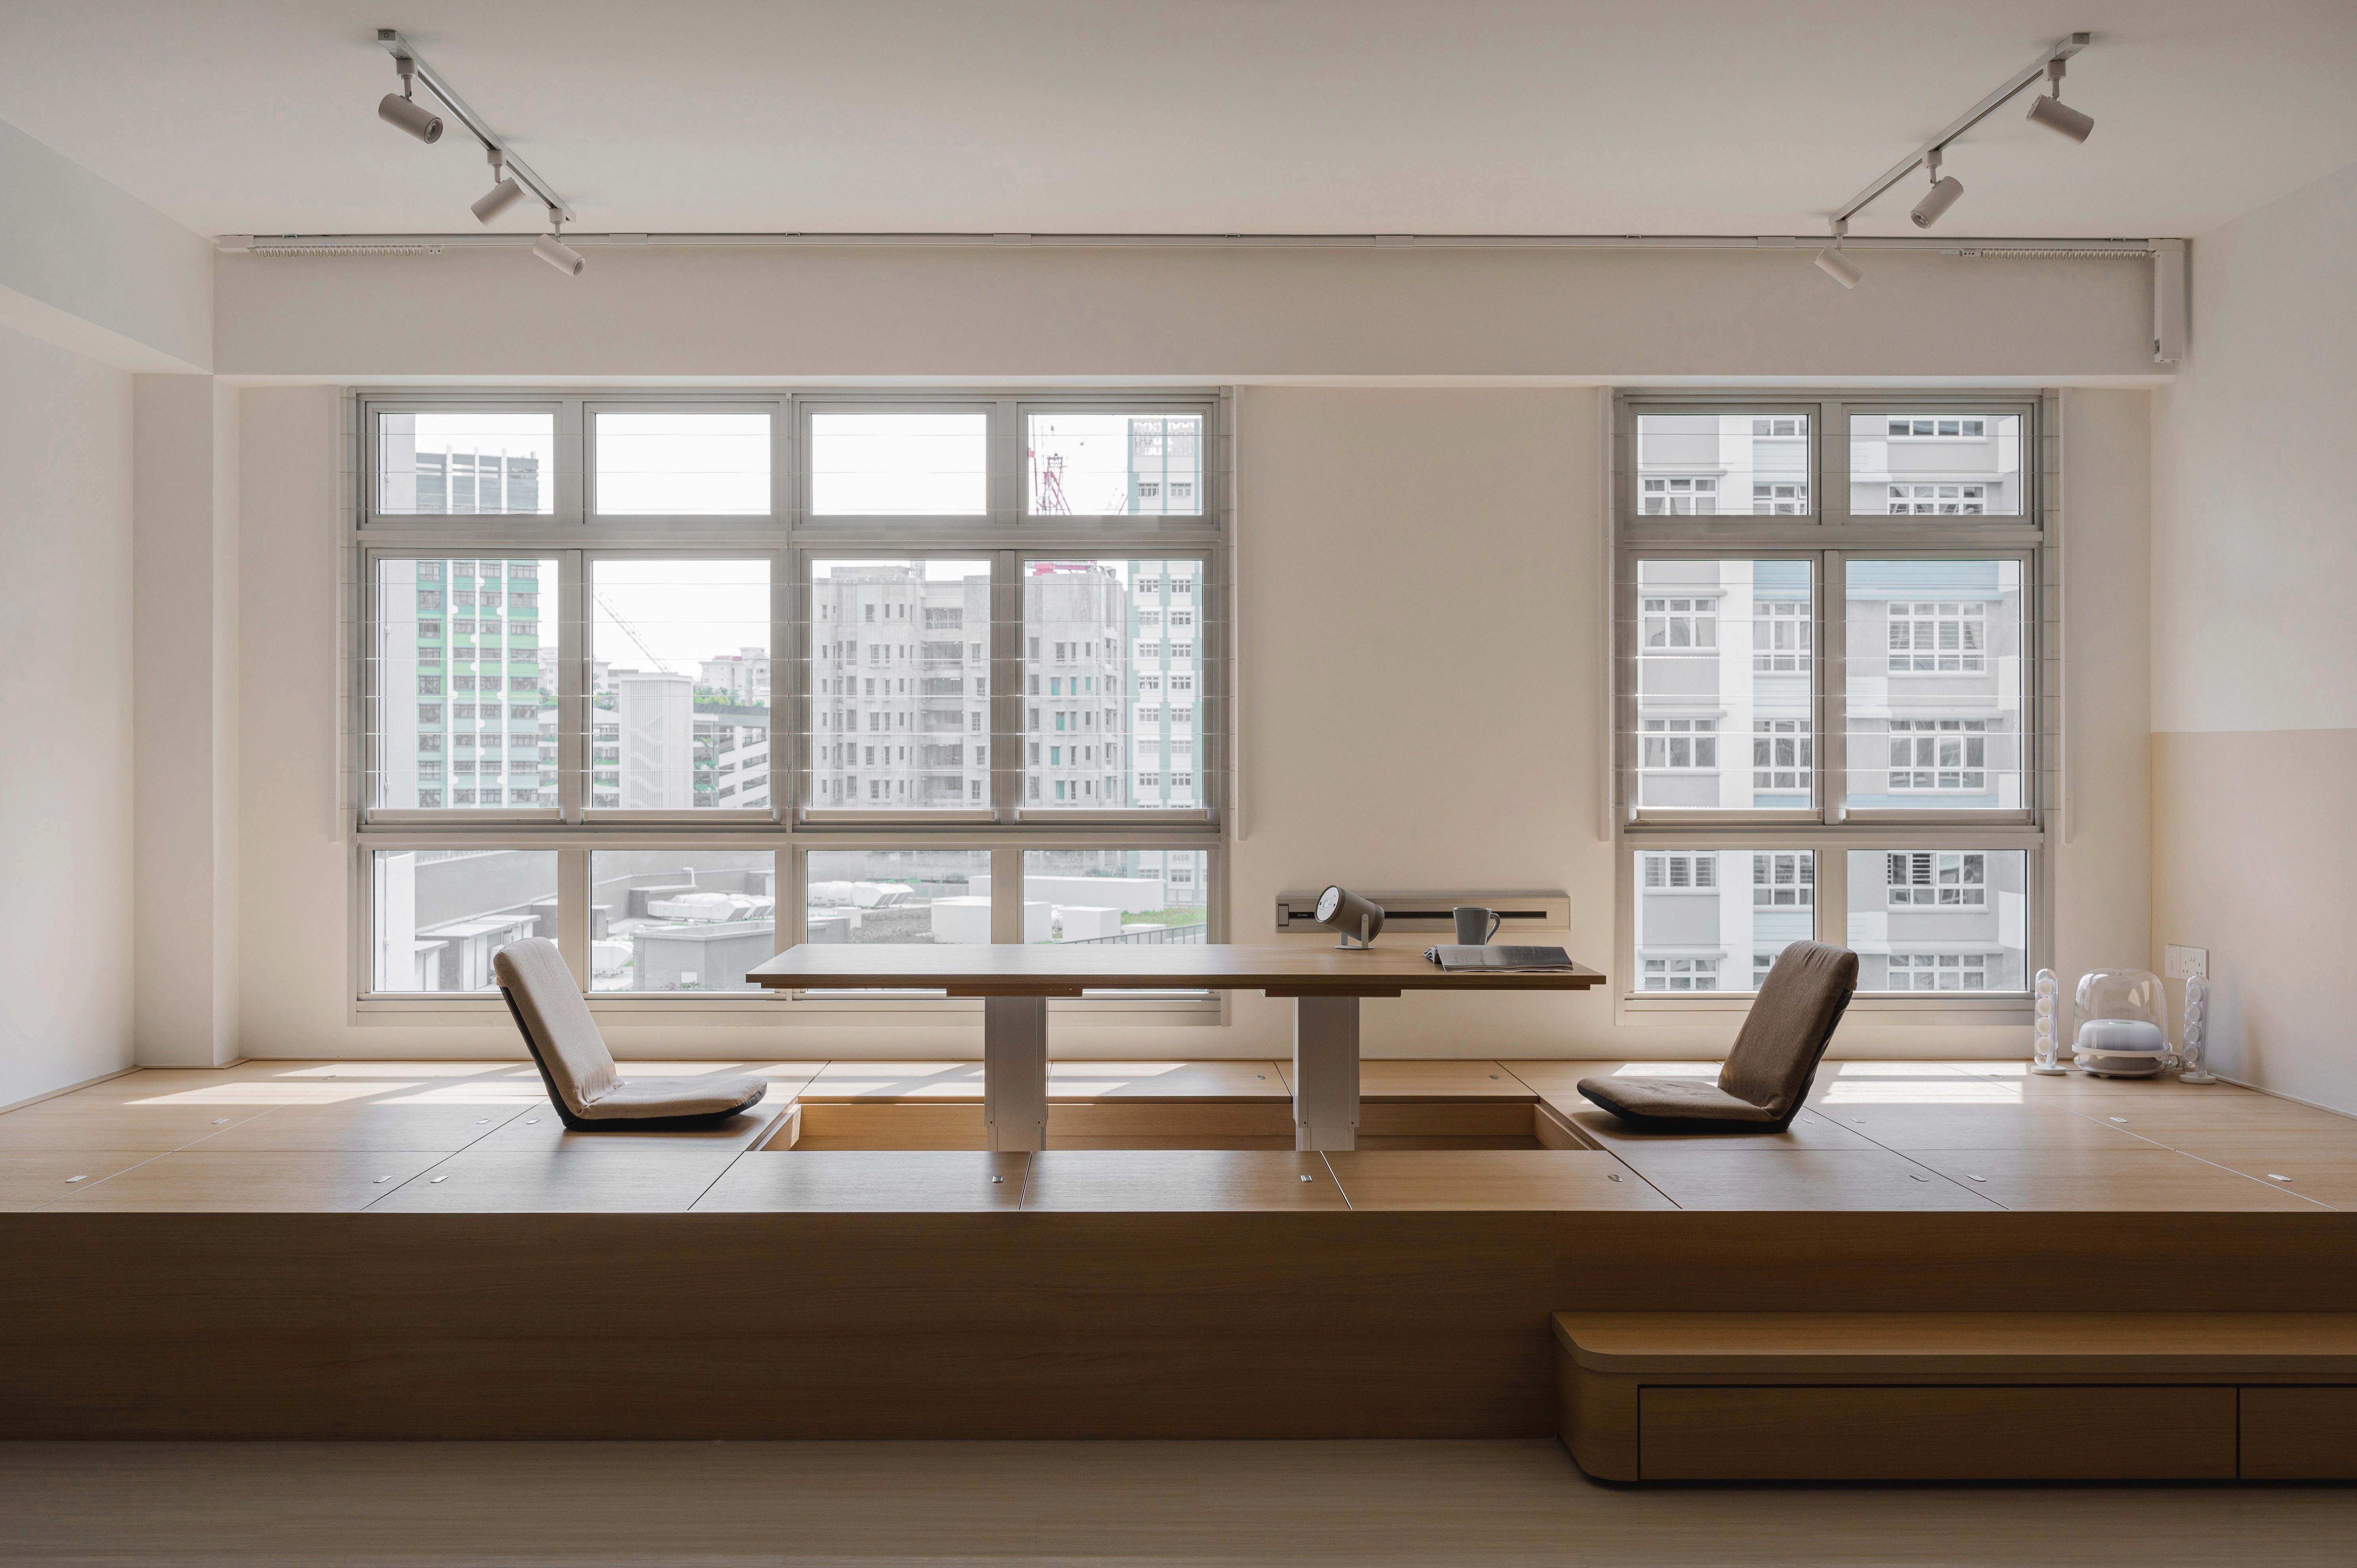 Japandi dining table with minimalist chairs